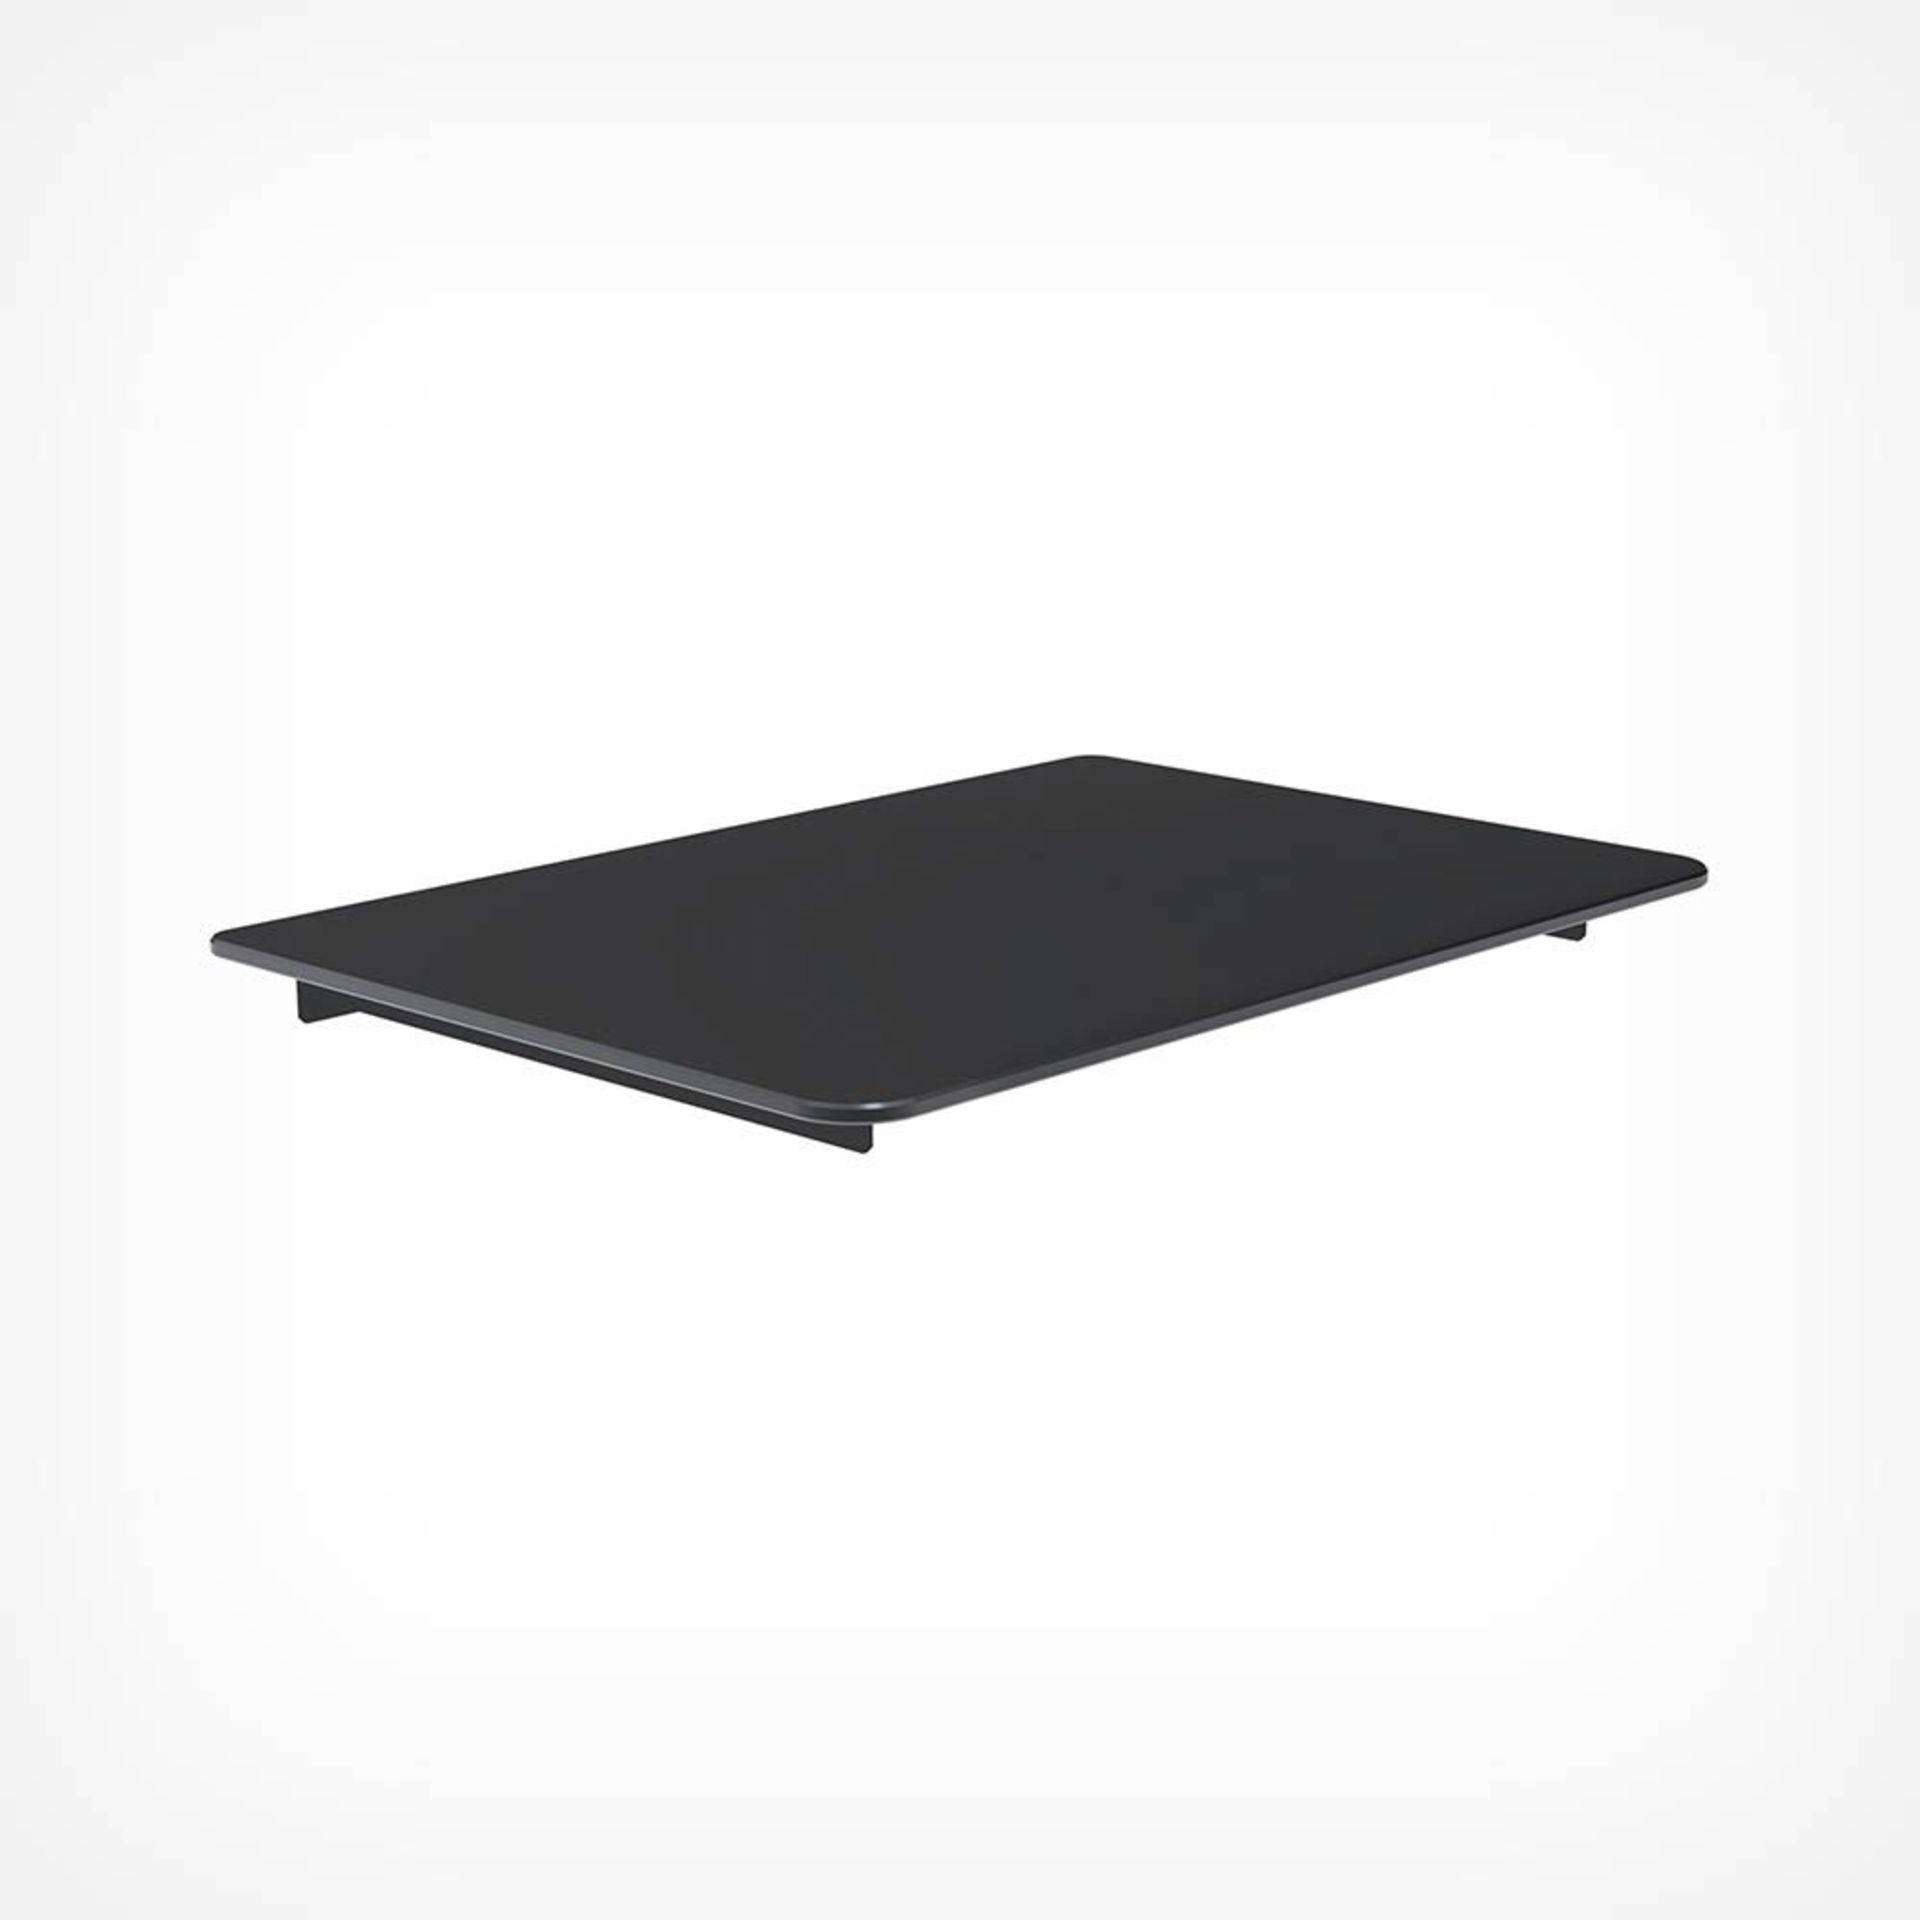 Floating Shelf - BI. Perfectly suited to sit below a wall-mounted TV, our Floating Glass Shelf is